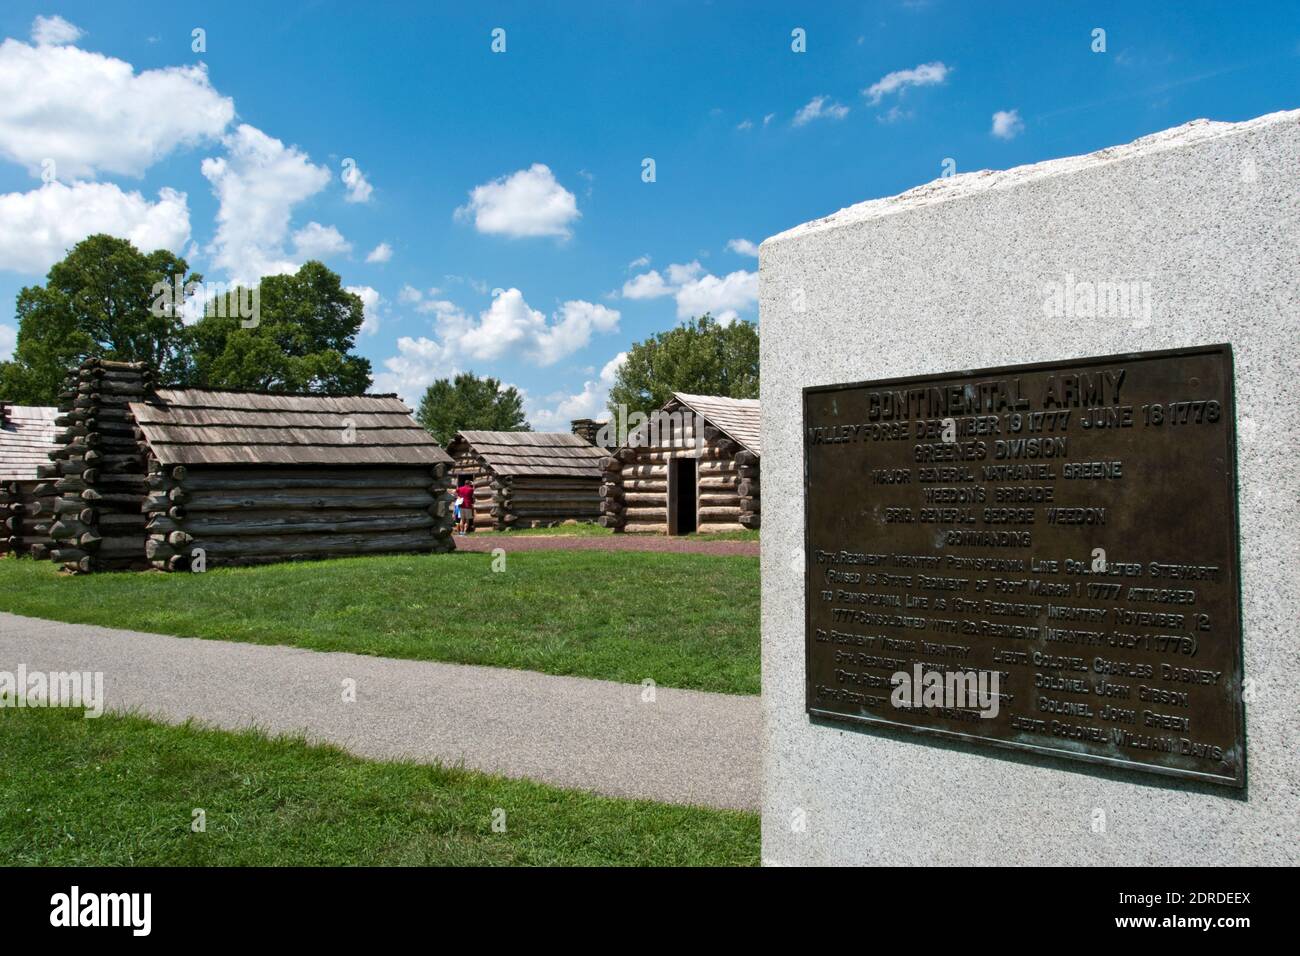 A marker describes which troops camped at this site during the winter encampment of the Continental Army at Valley Forge, now the Valley Forge Nationa Stock Photo